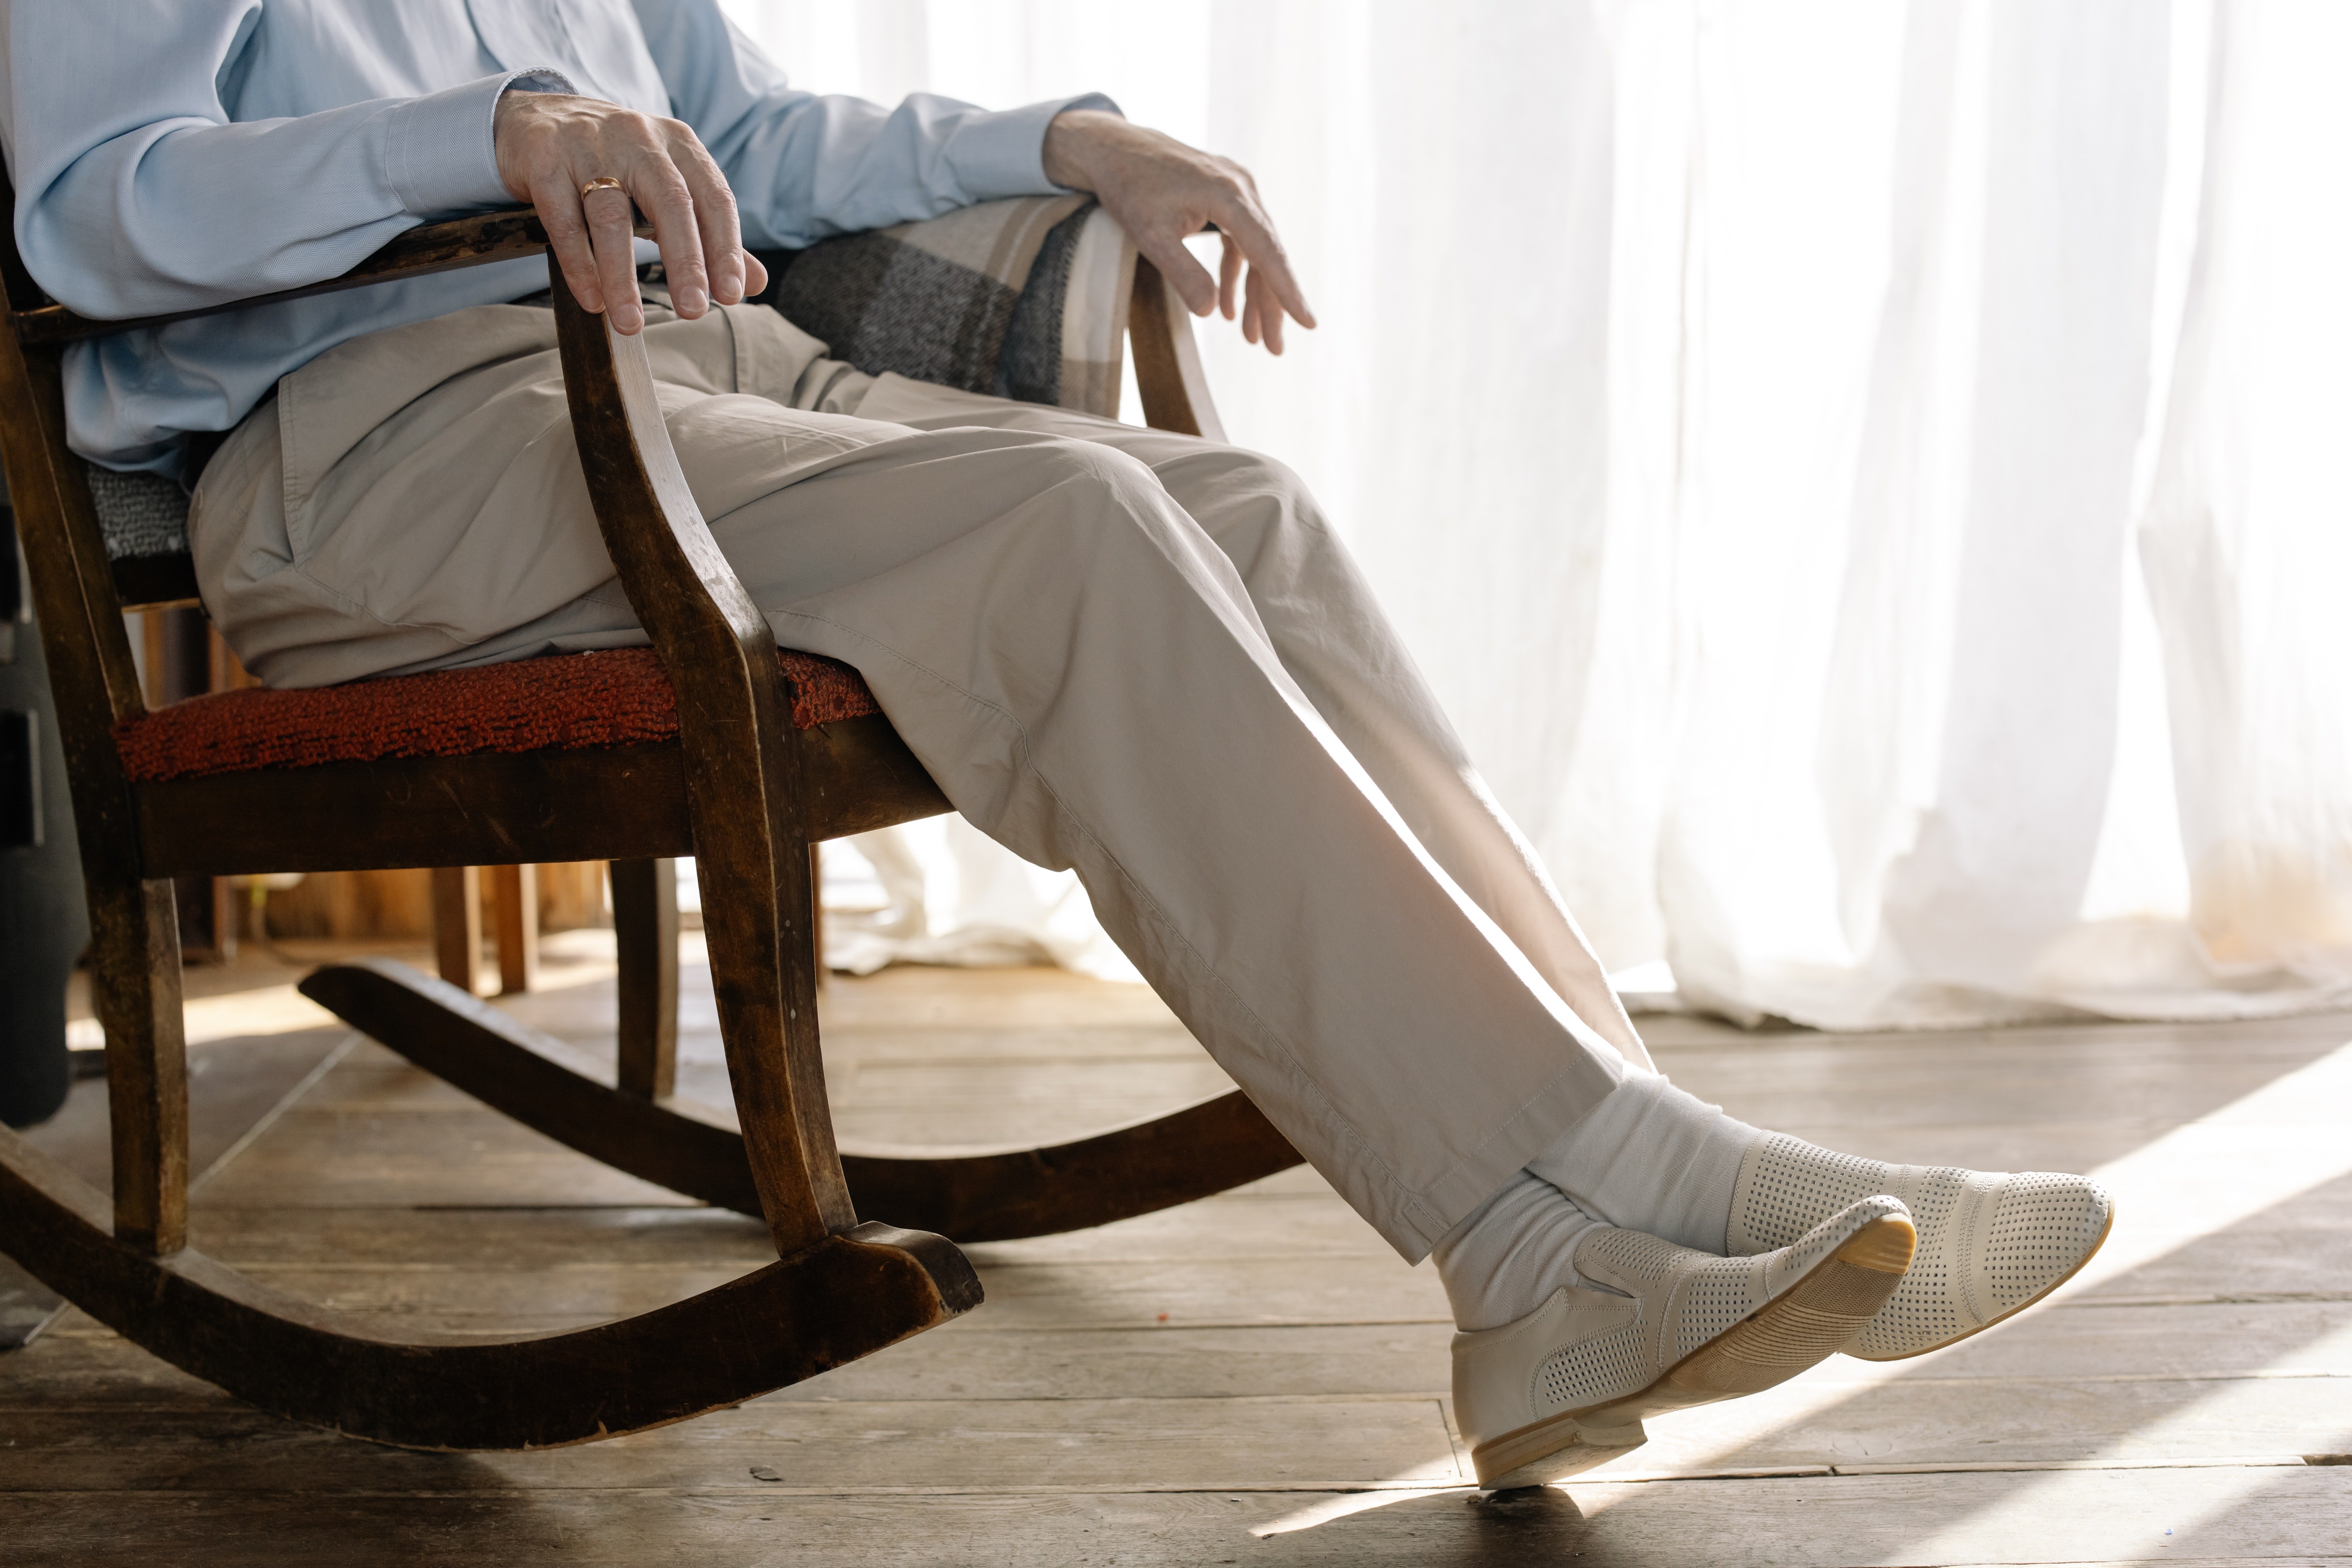 Pictured - A male individual on a rocking chair | Source: Pexels 